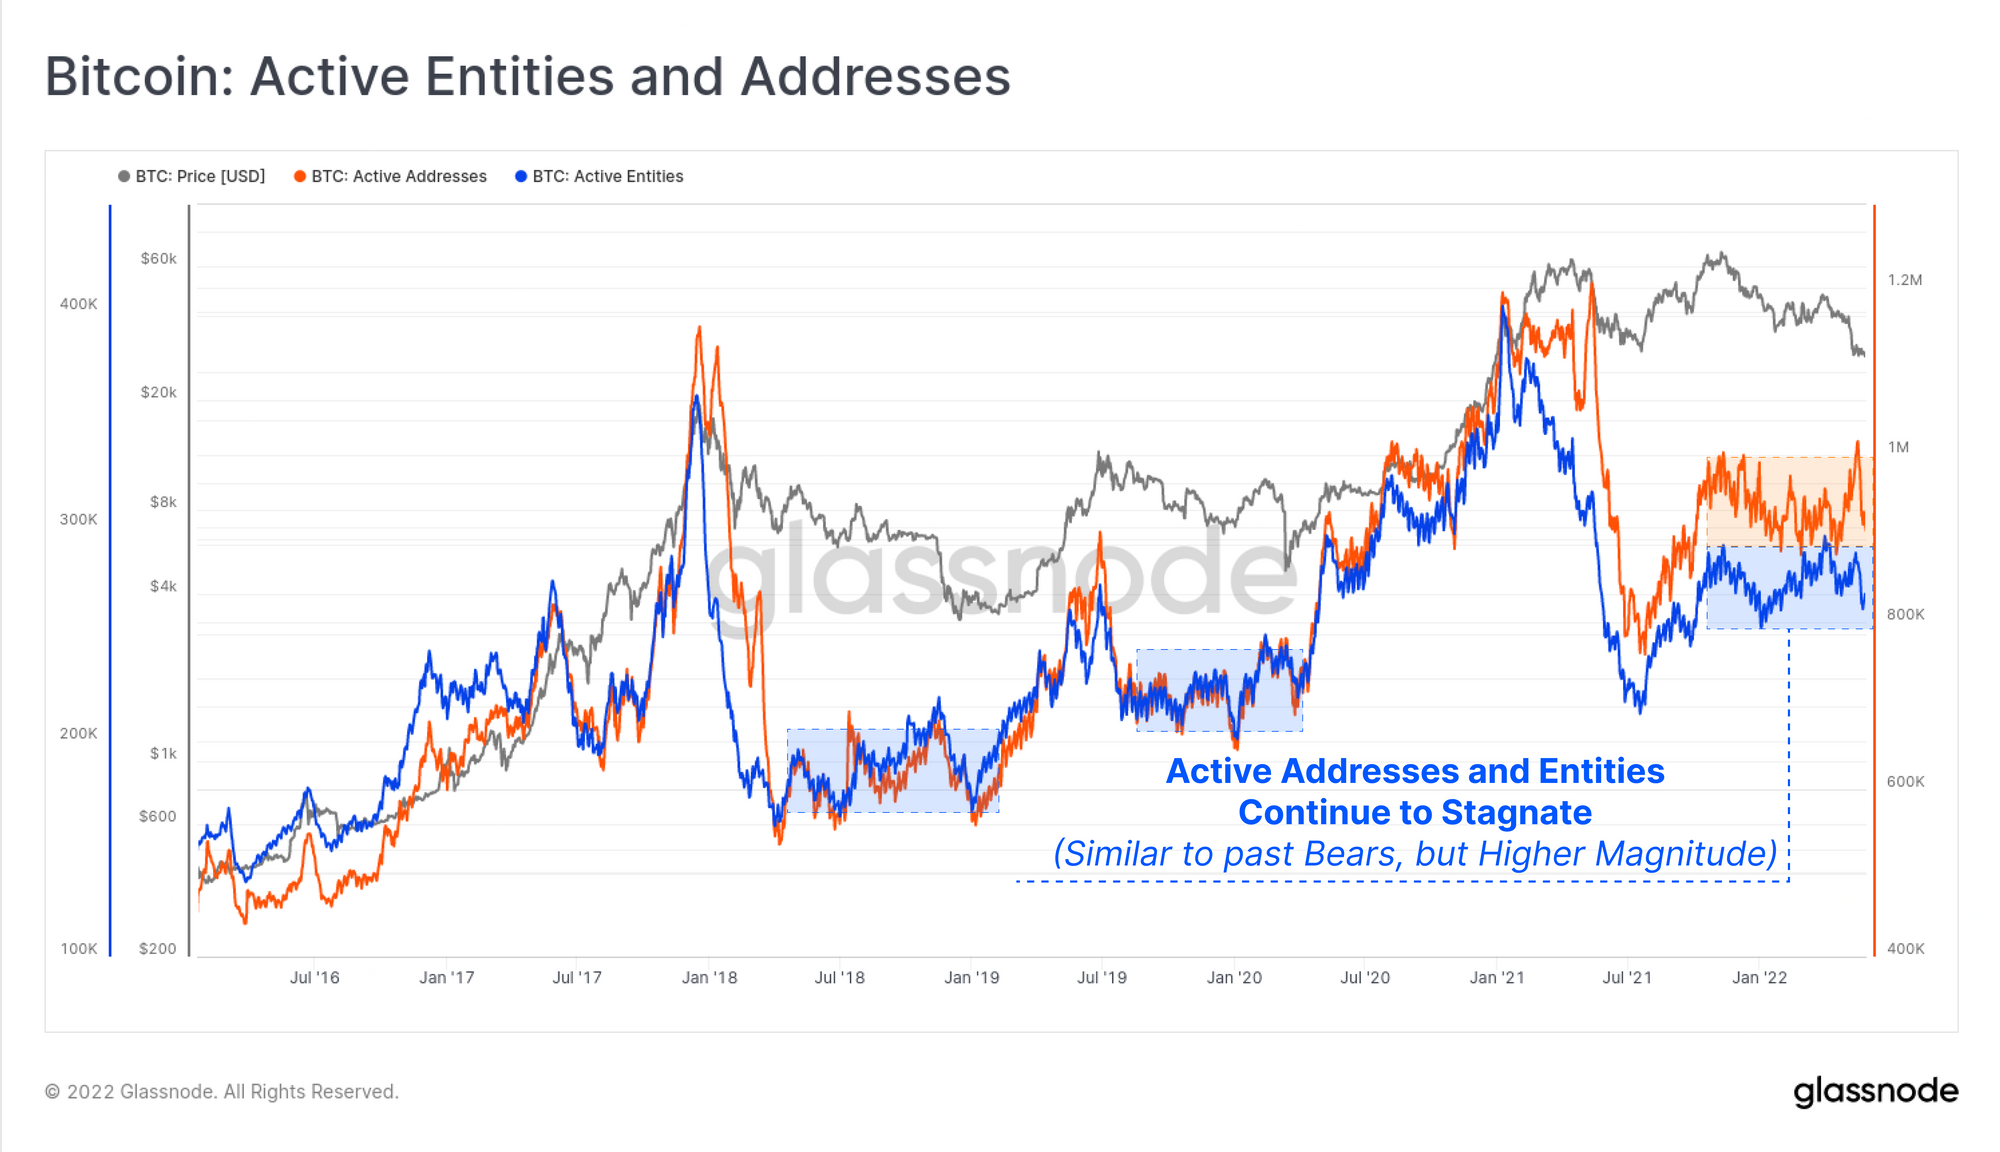 Bitcoin: Active Entities and Addresses